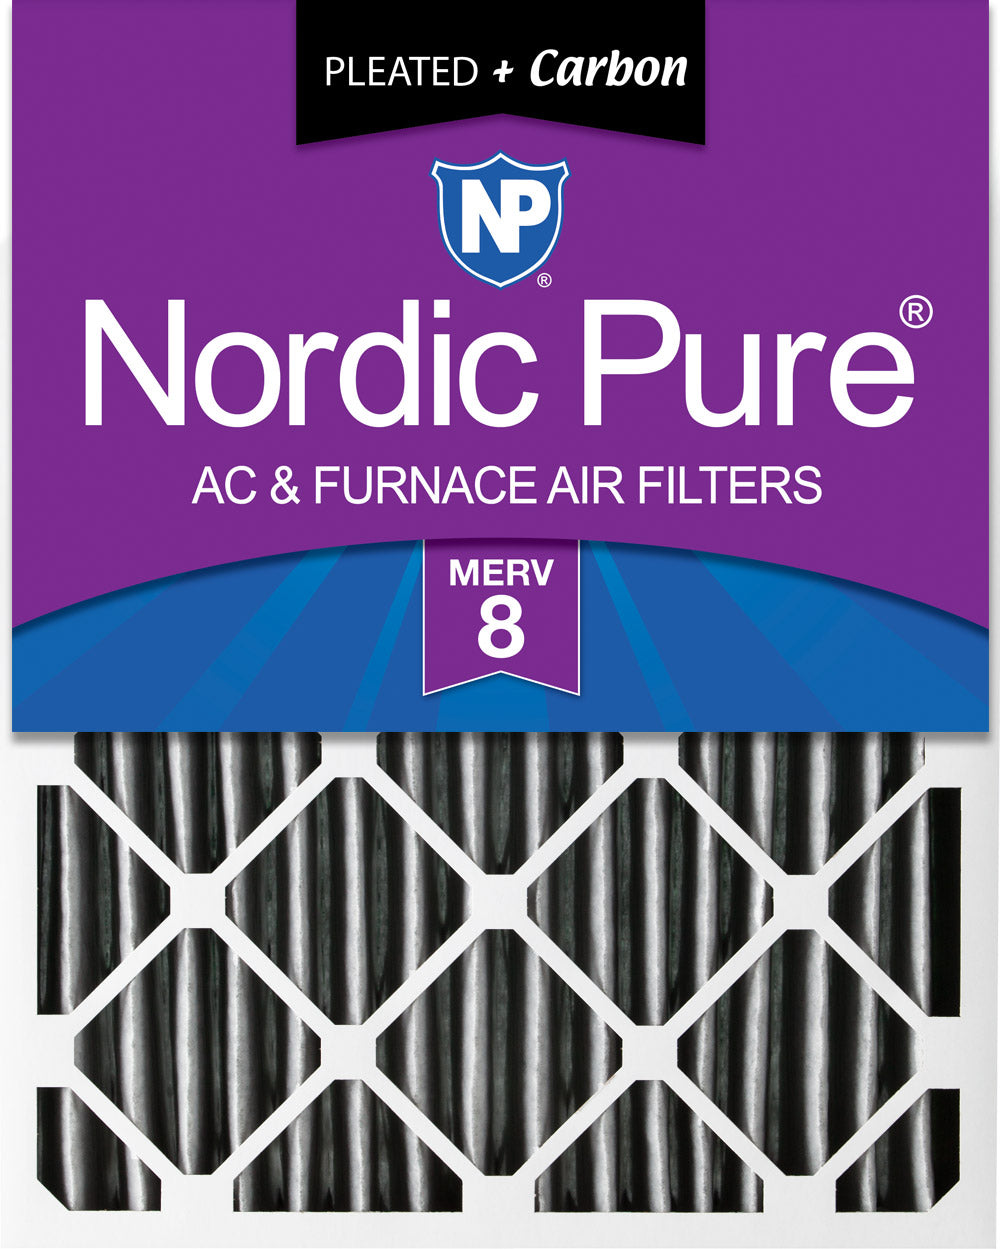 24x24x4 (3 5/8) Furnace Air Filters MERV 8 Pleated Plus Carbon